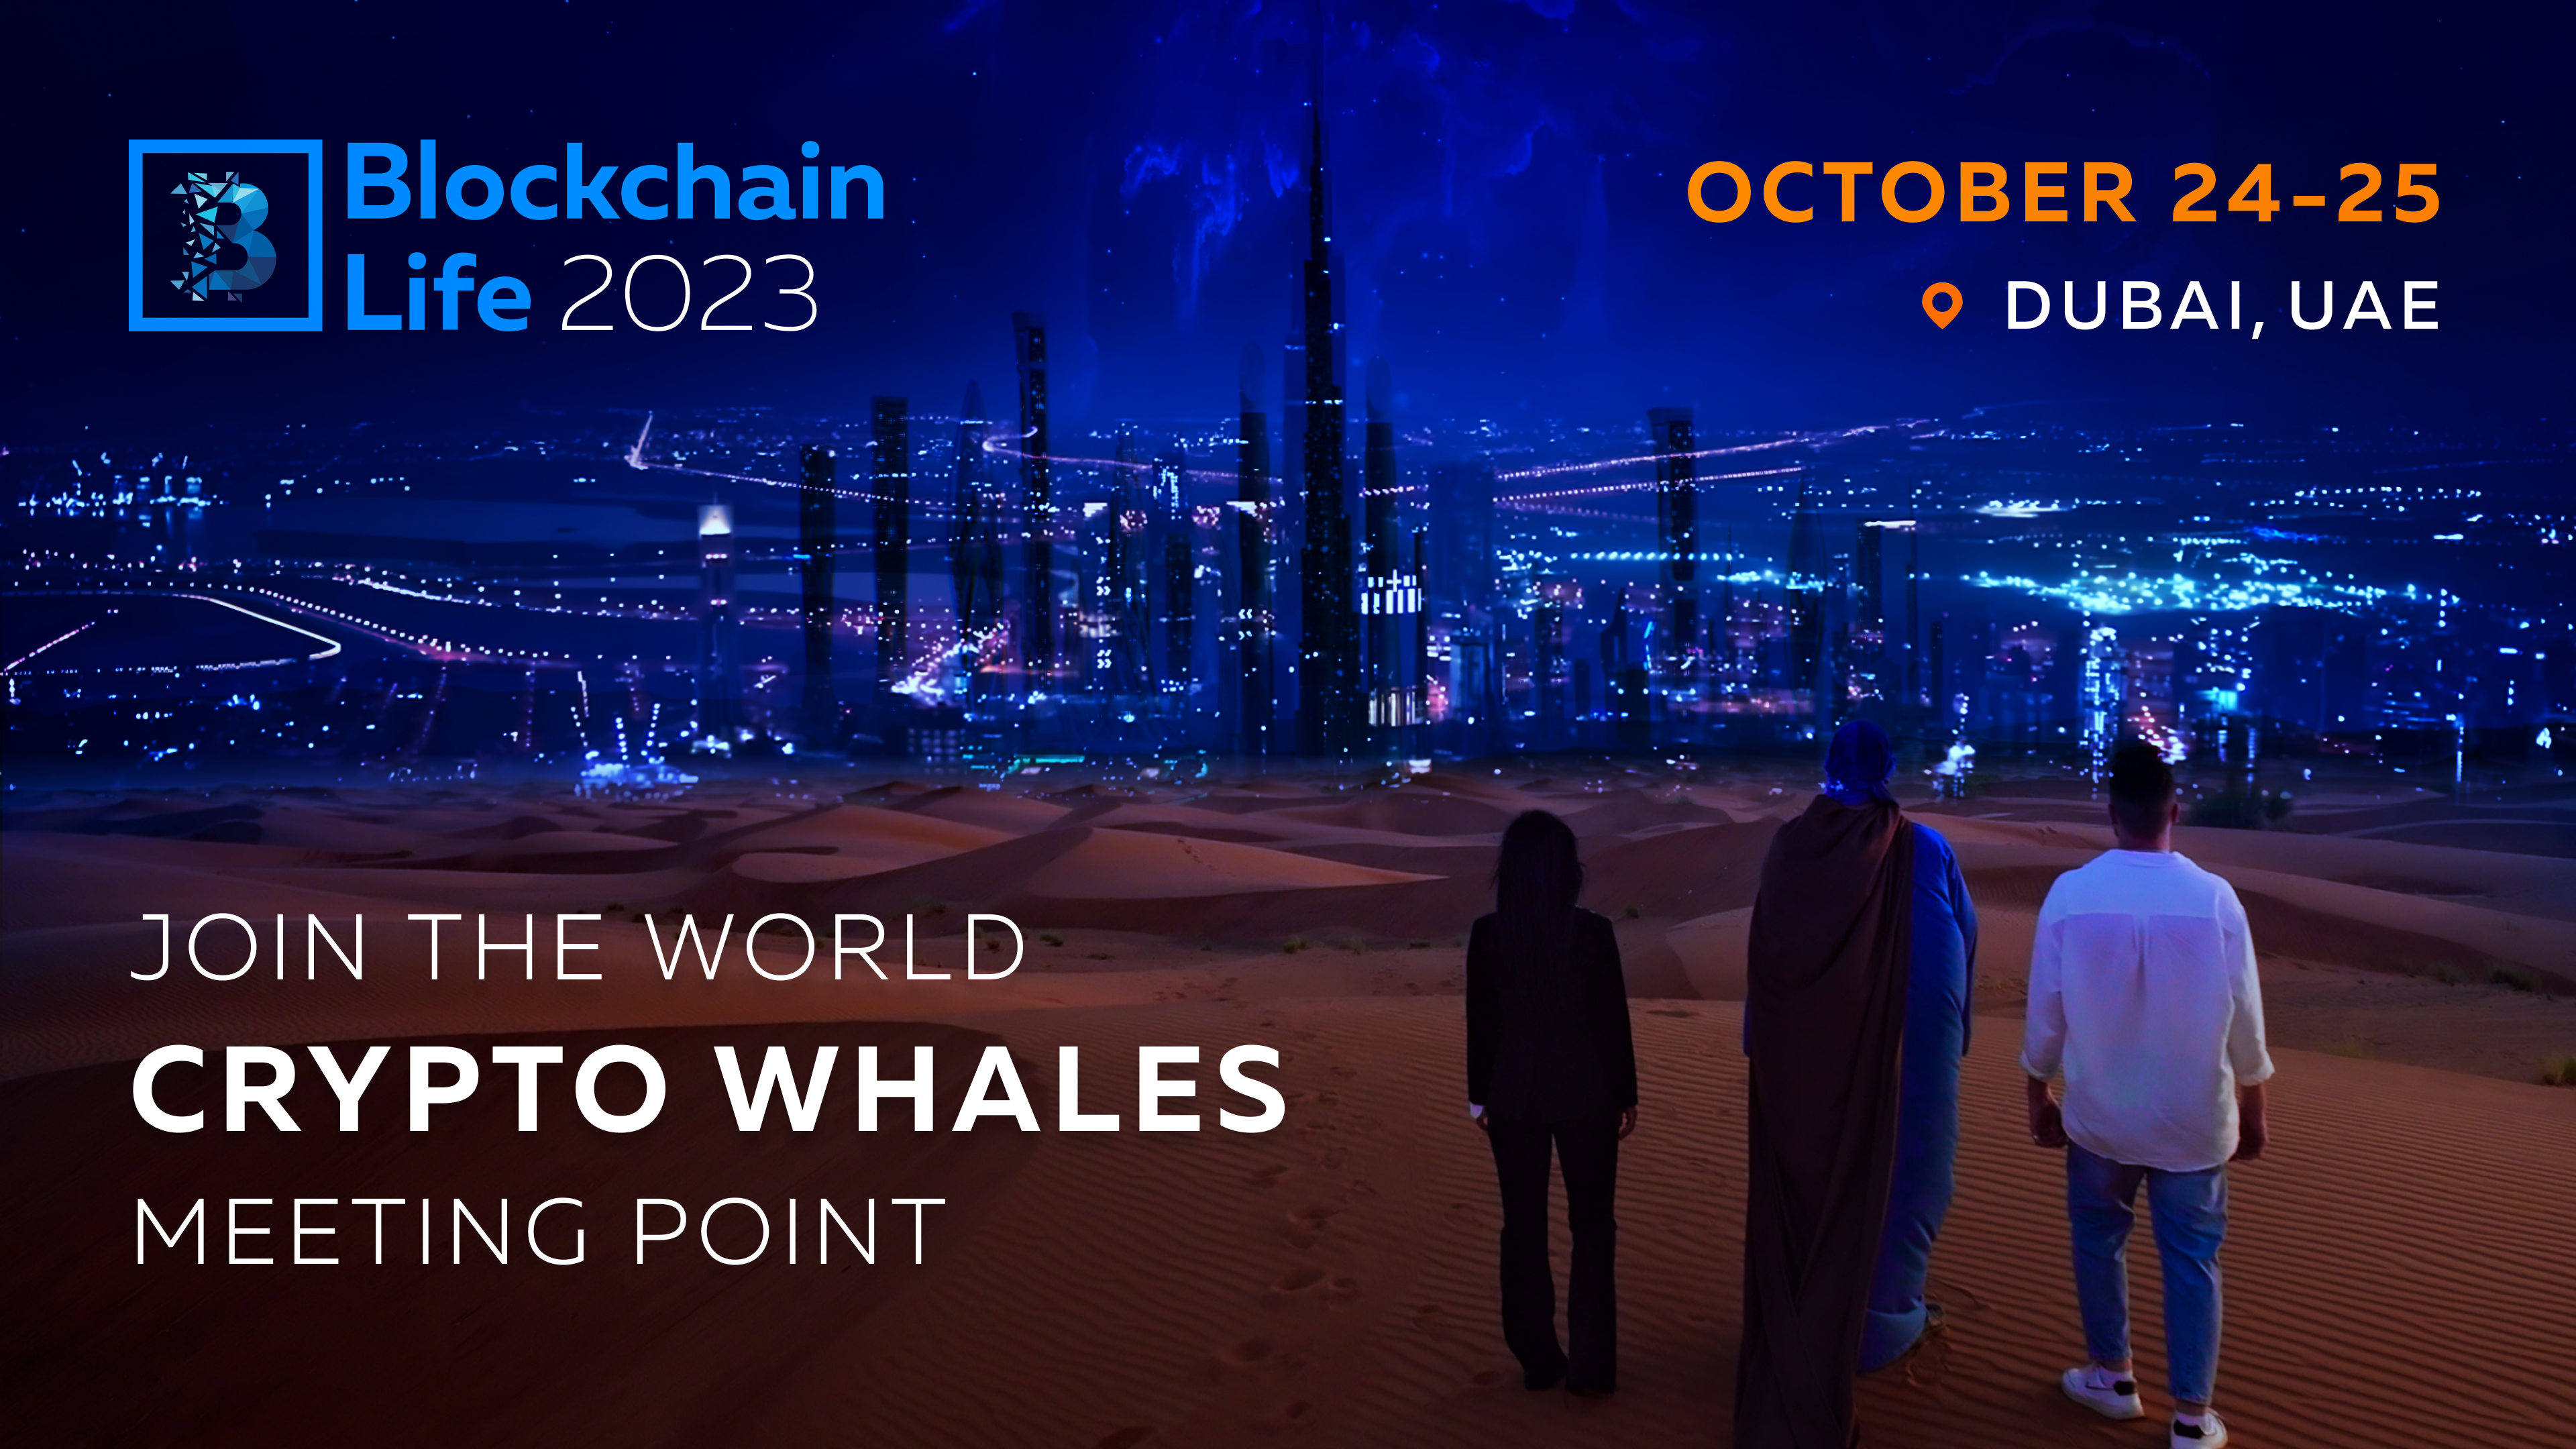 Be a Part of Blockchain Life 2023 in Dubai – The Crypto Event of the Year